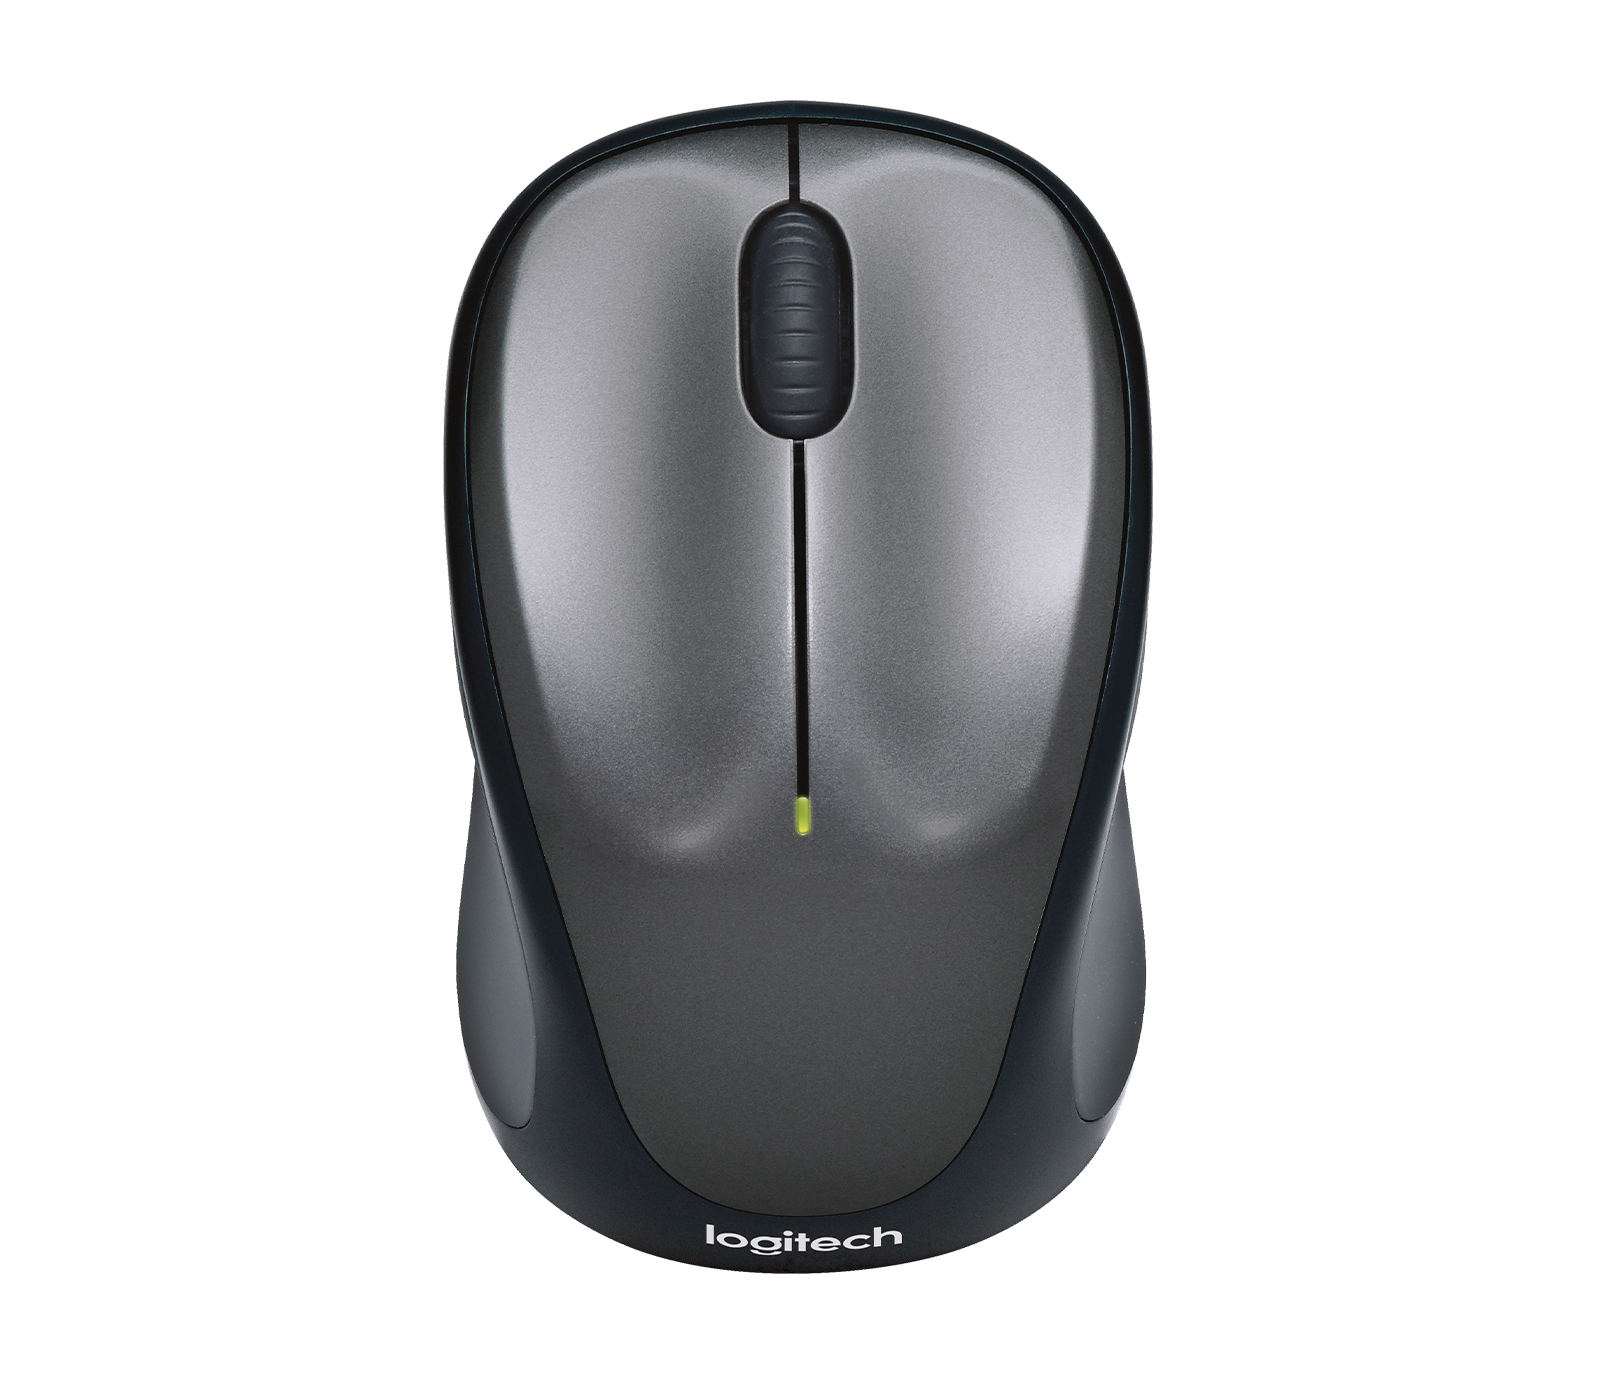 Partially Brig ear M235 Wireless Mouse - Compact Contoured Design | Logitech UK